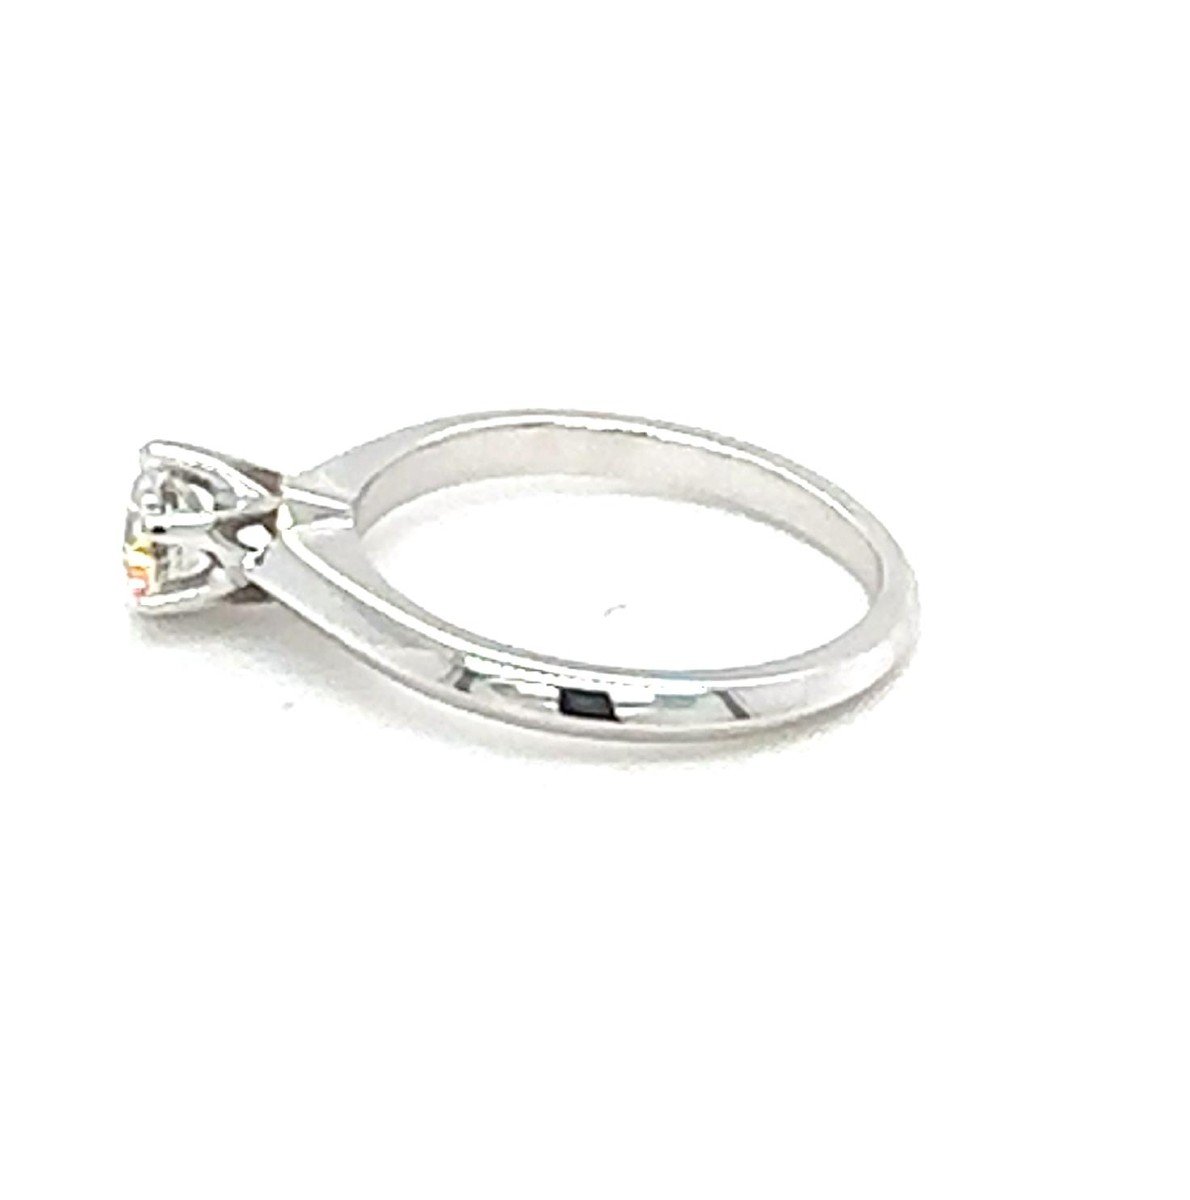 Solitaire Diamant Or Blanc 18kt.-photo-1